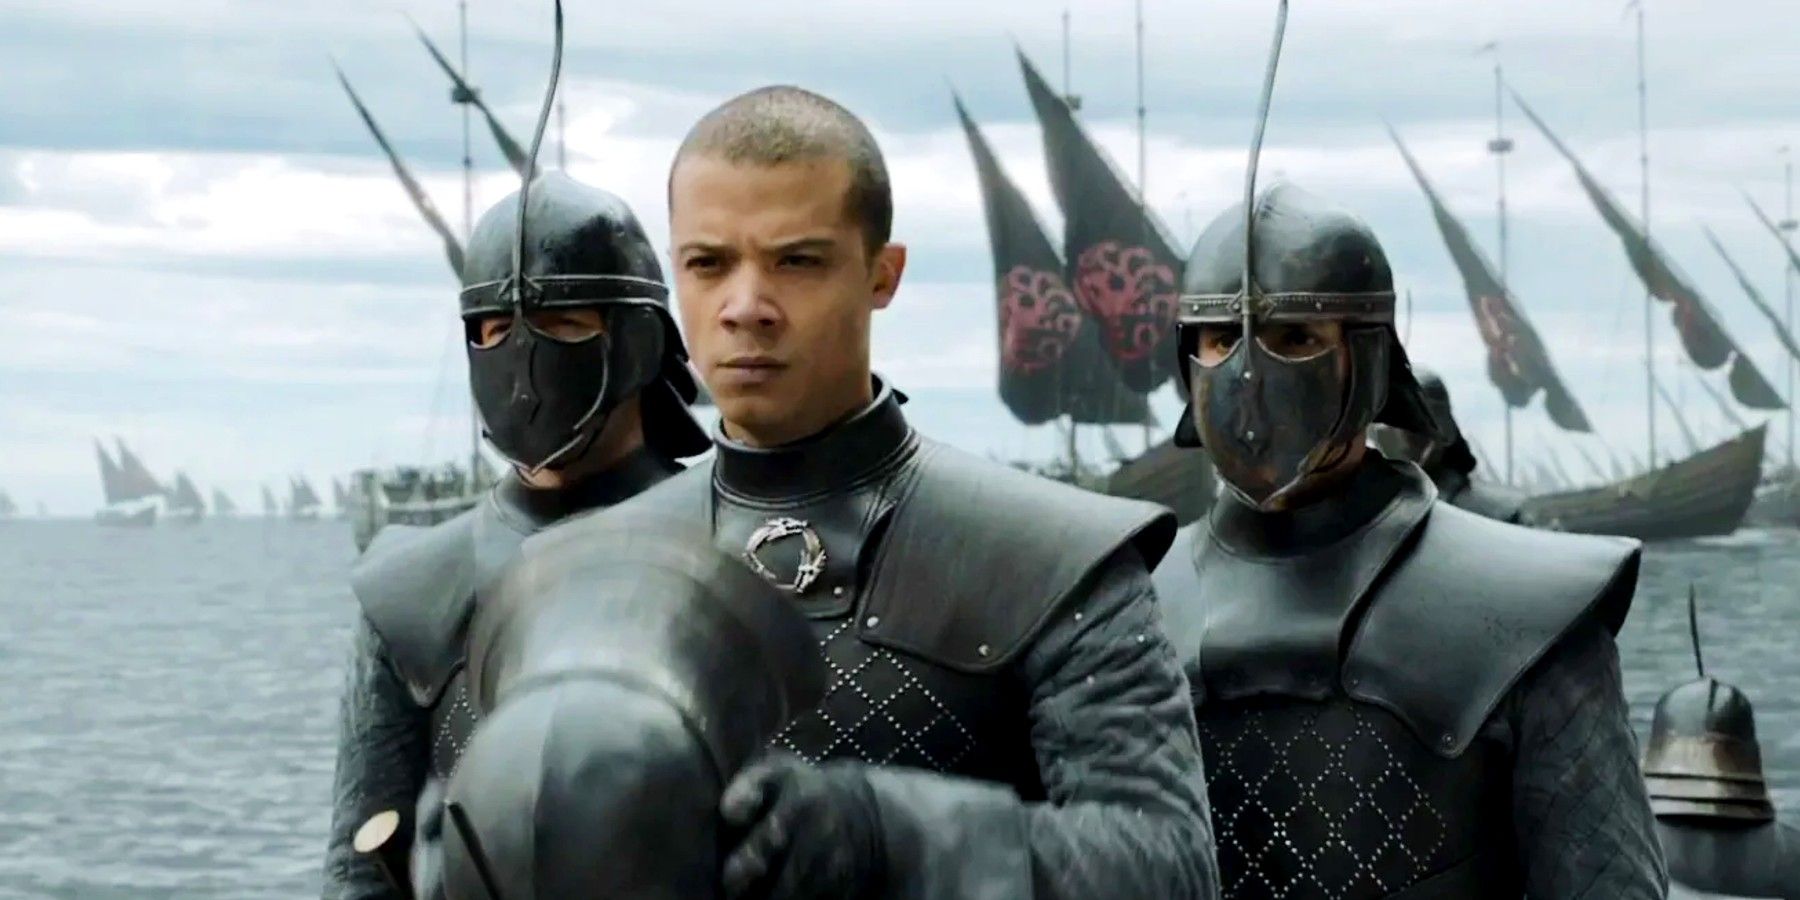 Grey Worm commanding the Unsullied while at sea in Game of Thrones